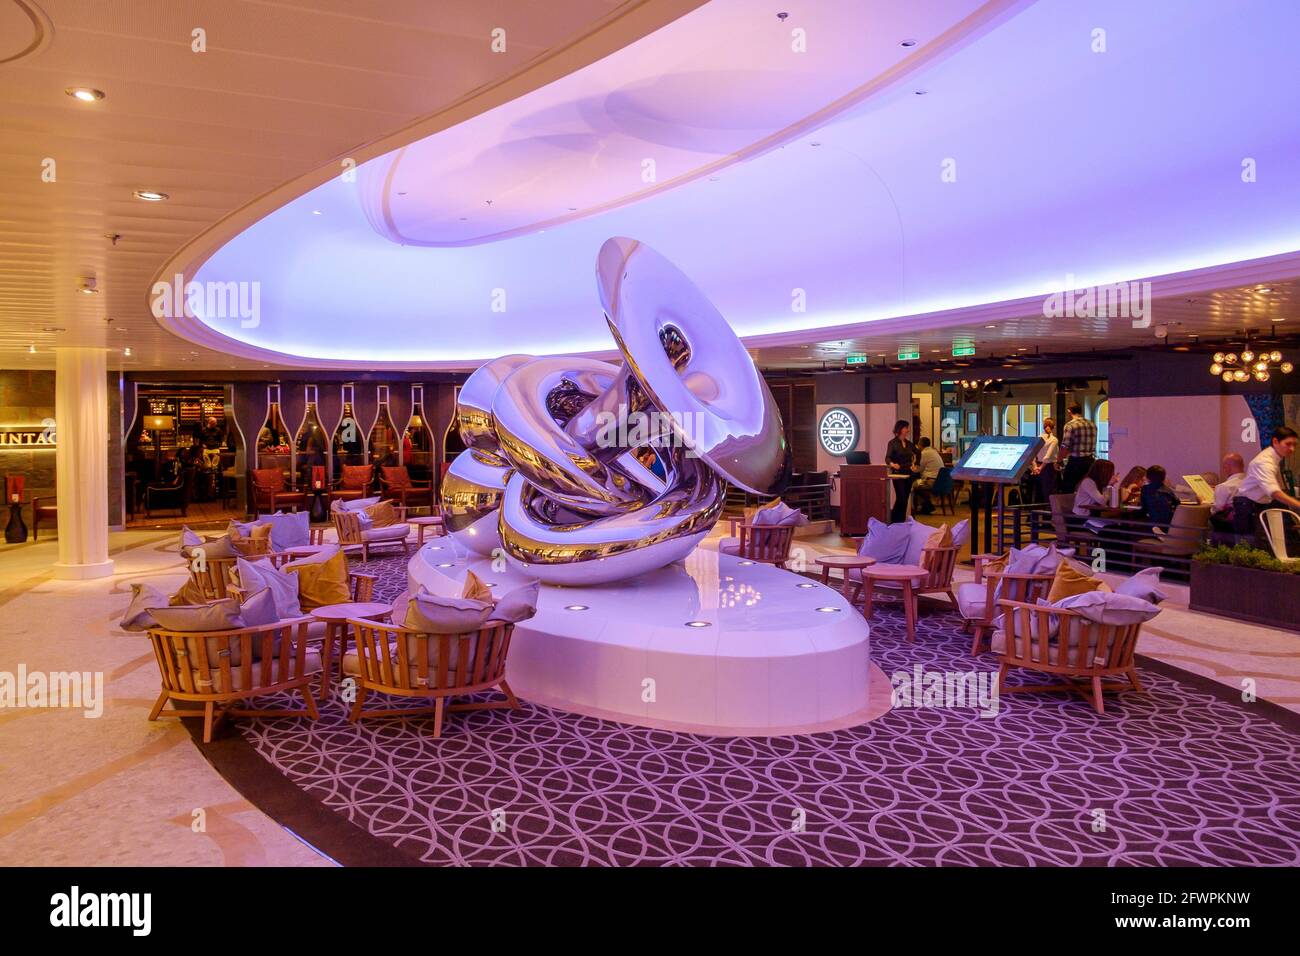 Art work, Eve by Artist Richard Hudson is a mirrored steel sculpture on board Royal Caribbean ship Anthem of the Seas. Stock Photo